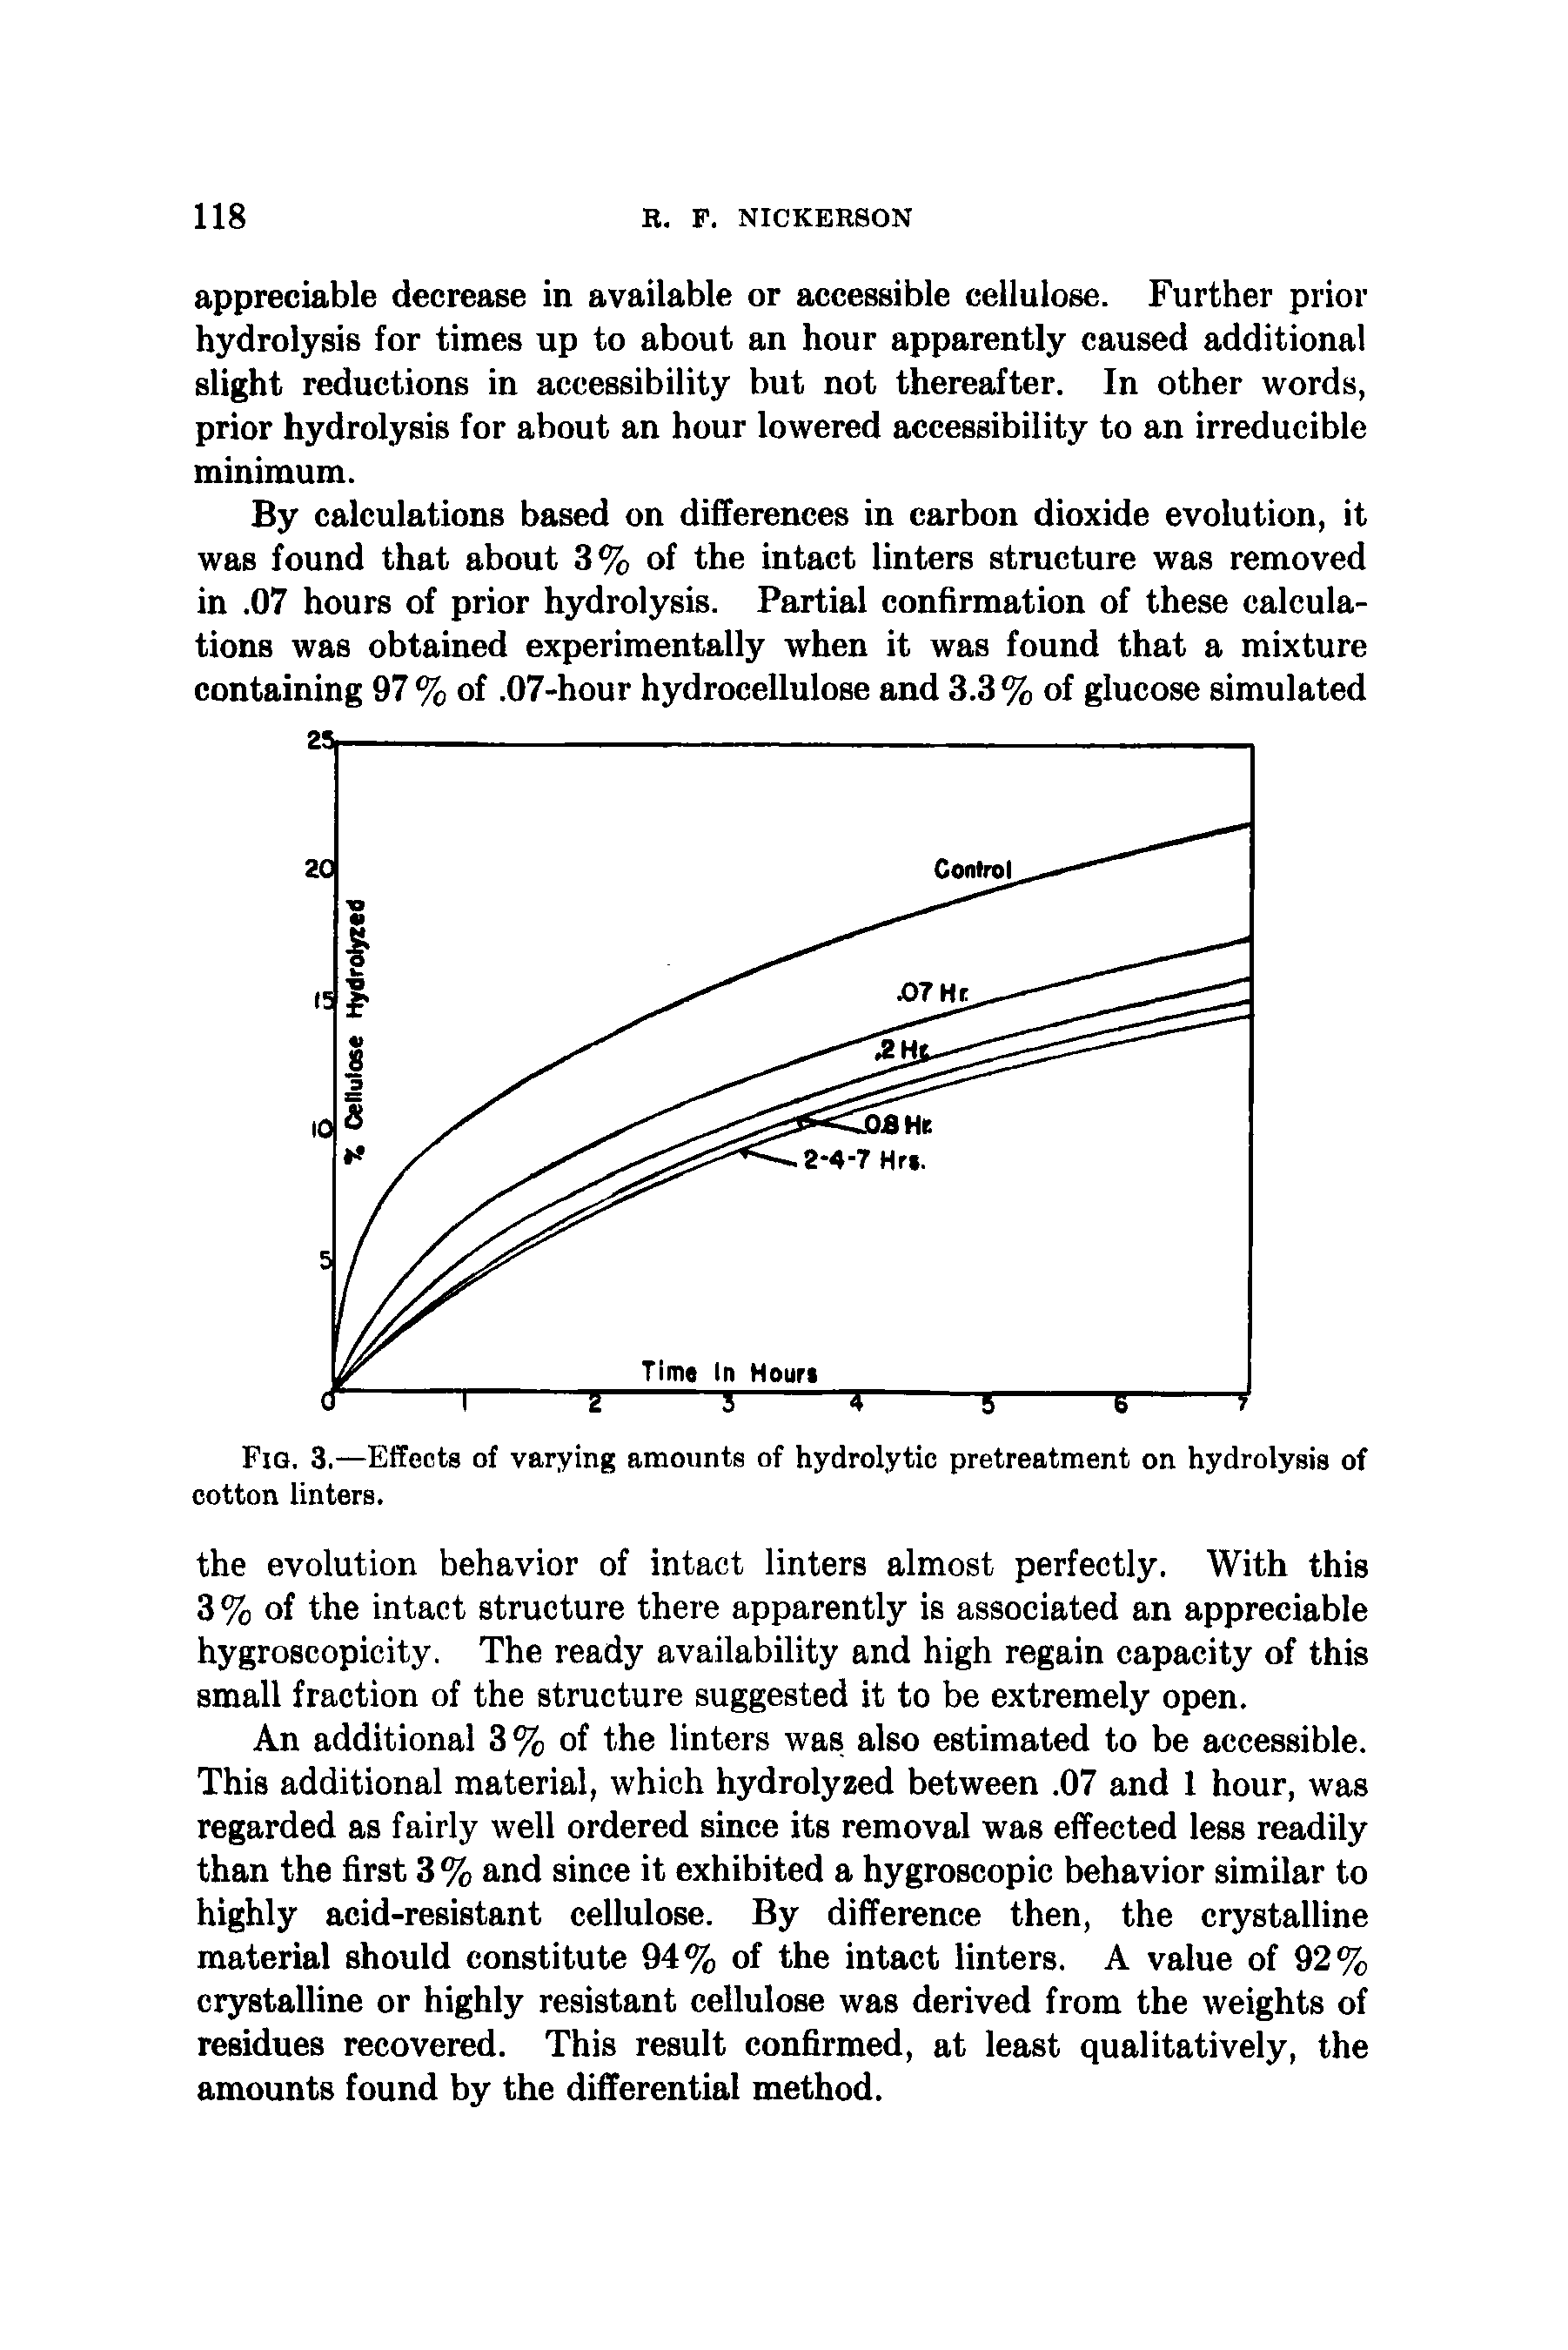 Fig. 3.—Effects of varying amounts of hydrolytic pretreatment on hydrolysis of cotton linters.